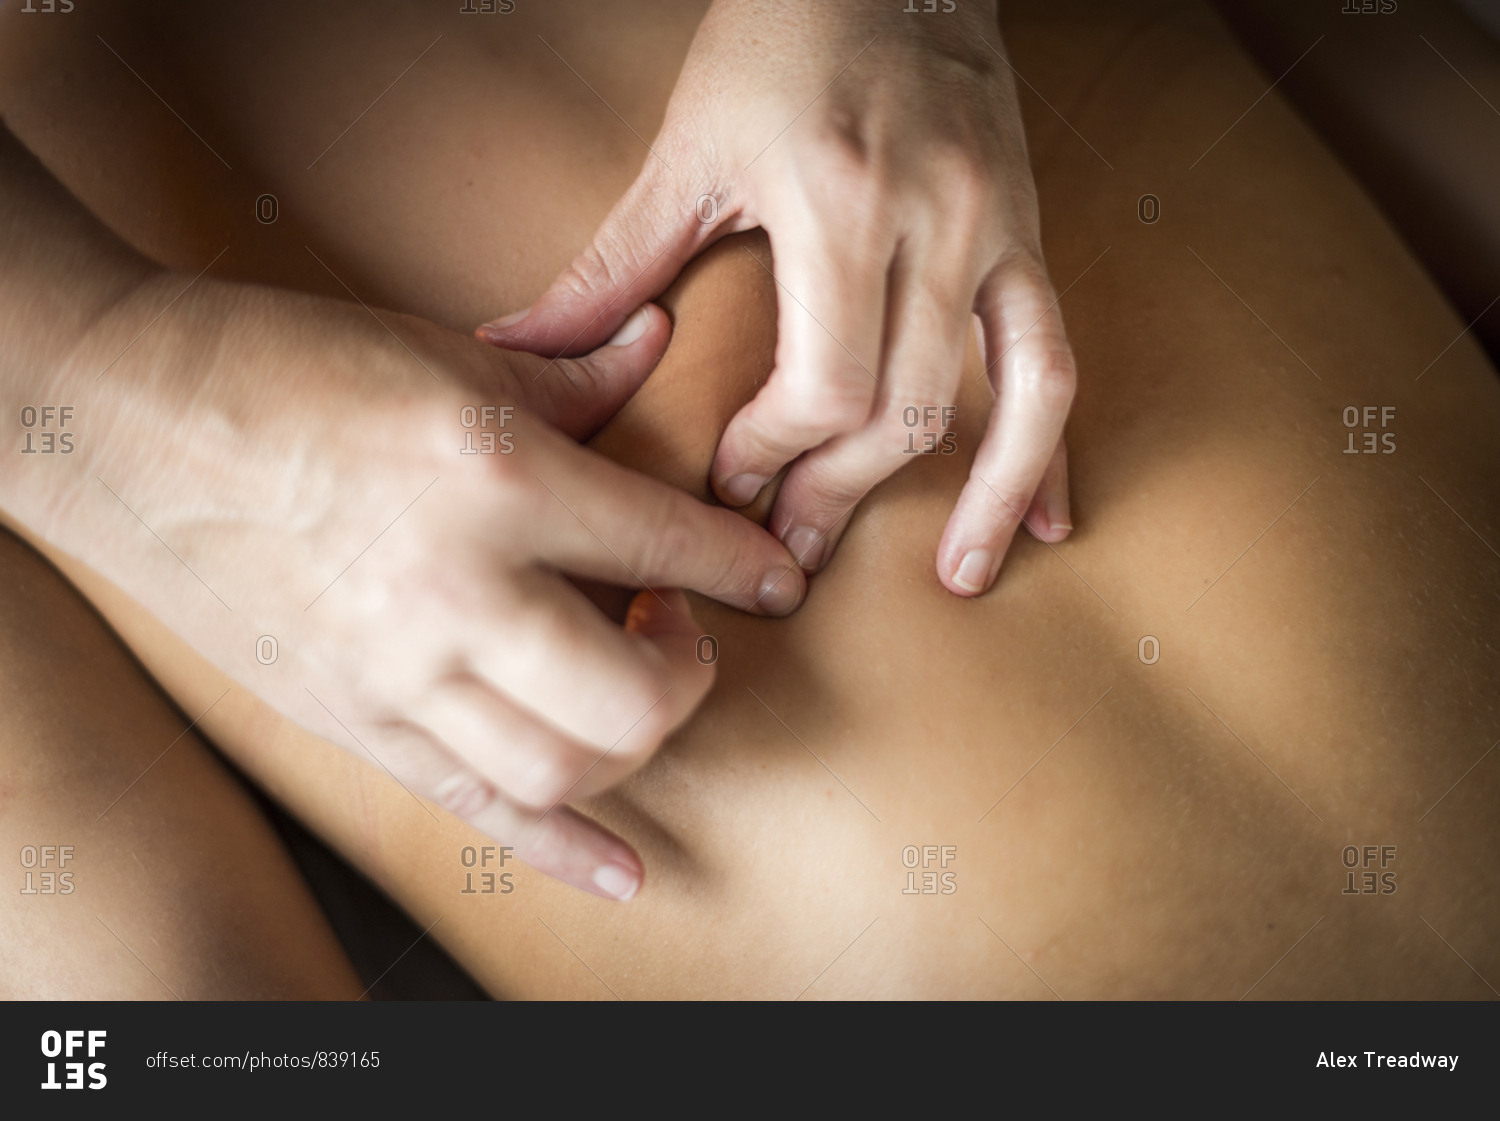 Overhead view of a woman being massaged